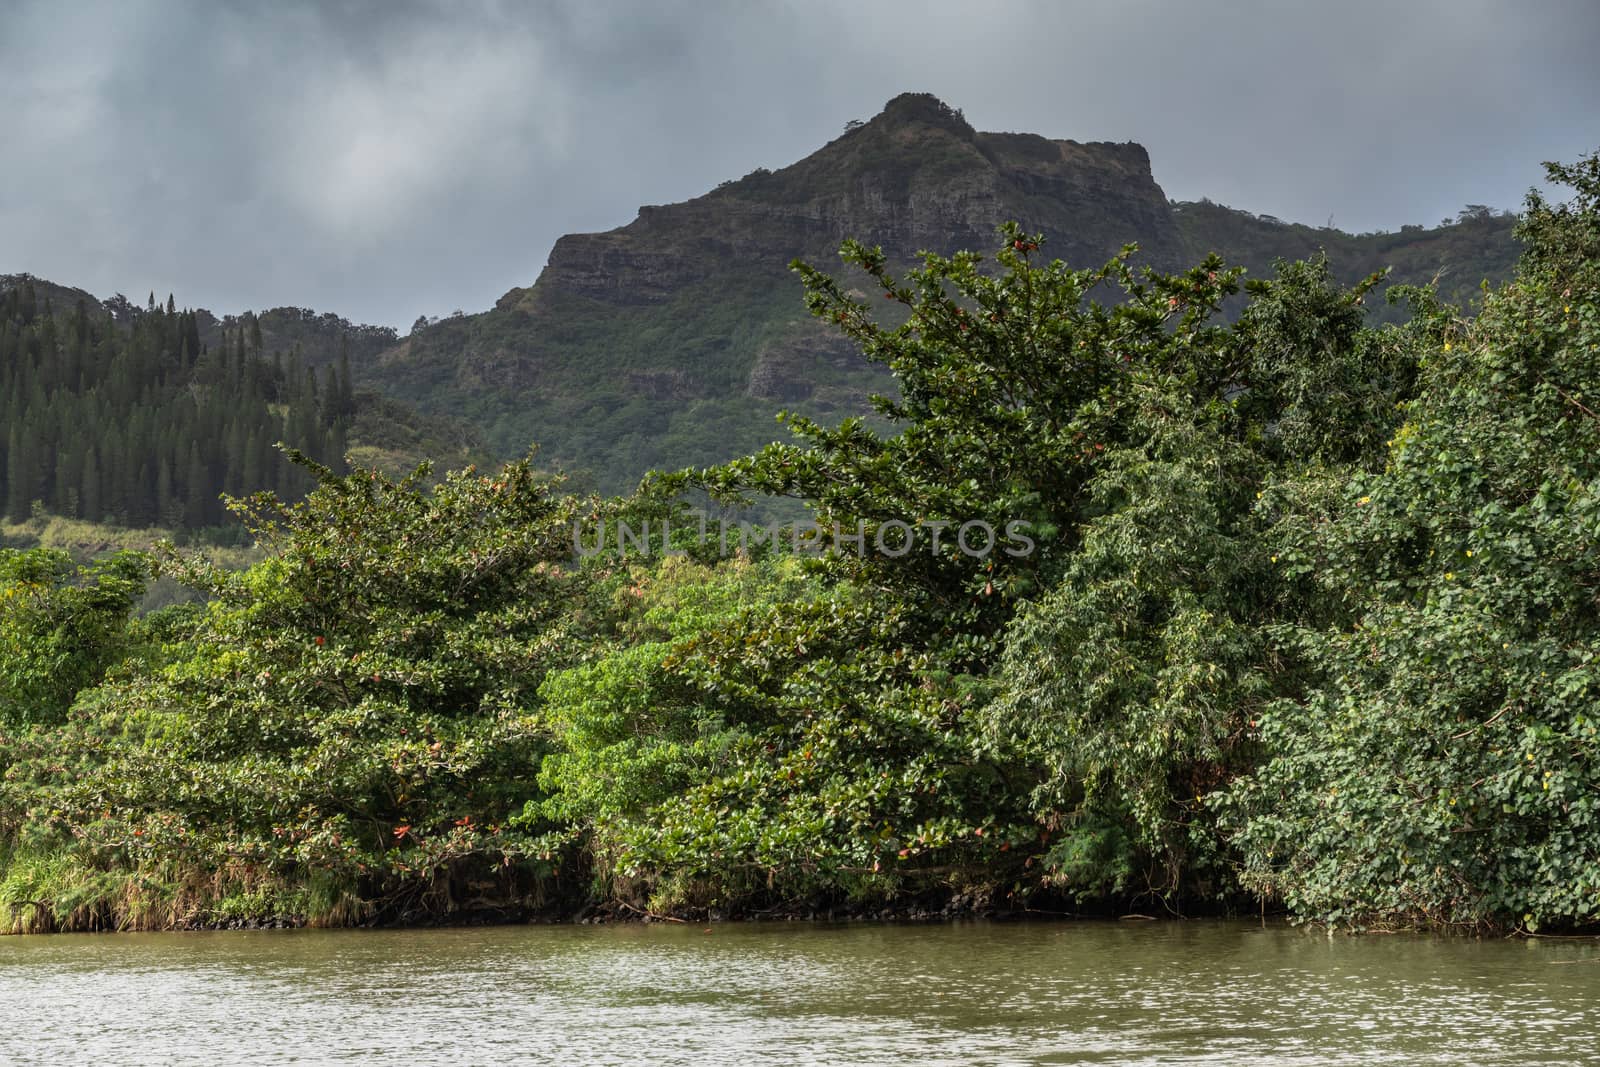 Nawiliwili, Kauai, Hawaii, USA. - January 16, 2020: Greenish South Fork Wailua River in front of green belt of trees under gray rainy cloudscape with brown rock mountain in back.